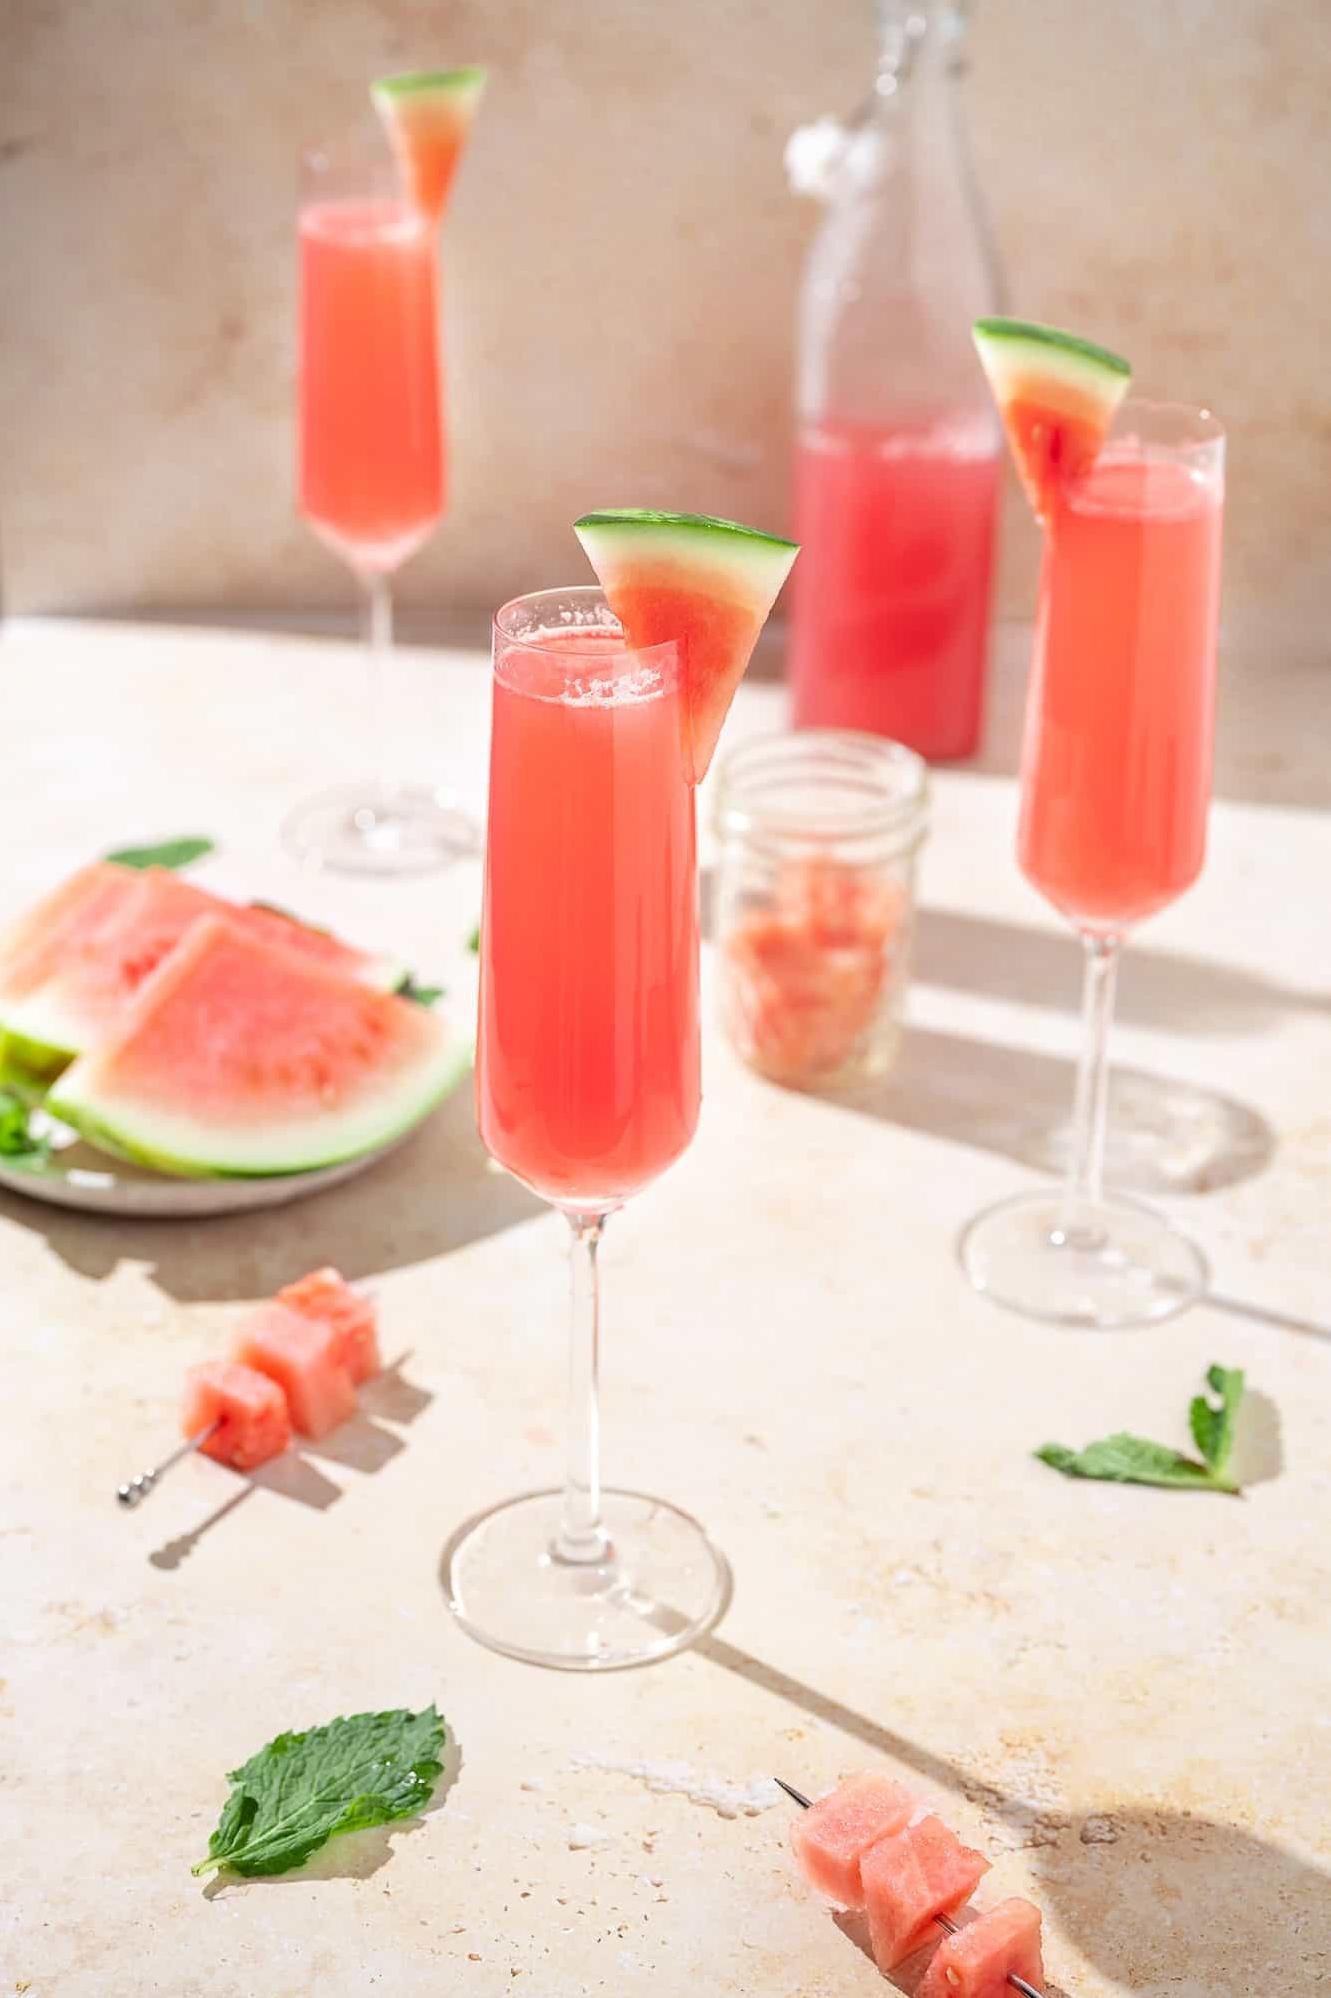  Brighten up your day with this deliciously fruity drink